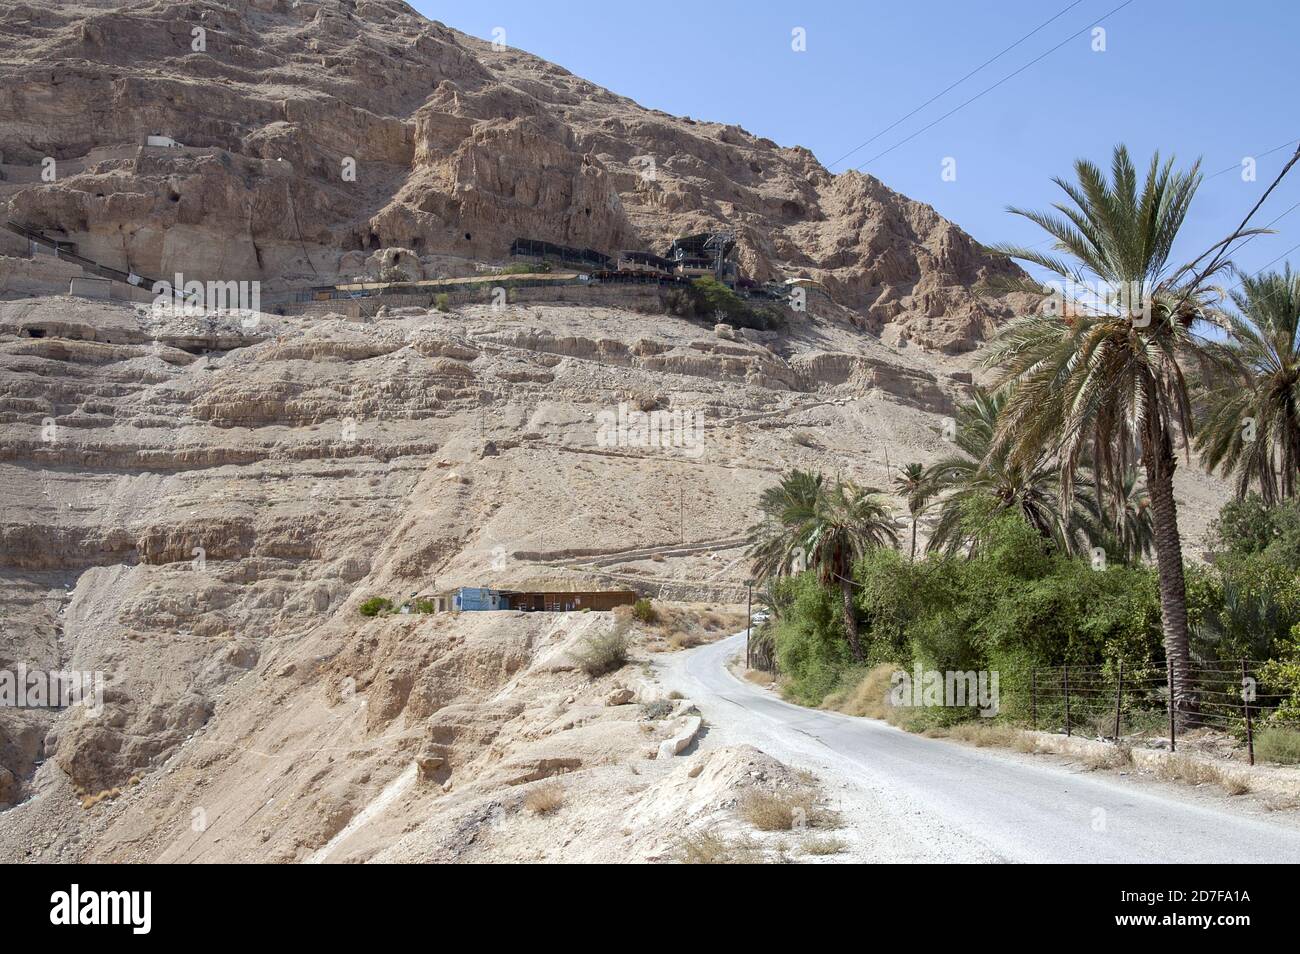 Jericho, أريحا, Israel, Izrael, ישראל, יריחו; The bottom view of the Mount of Temptation and Greek Orthodox Monastery of the Temptation Stock Photo